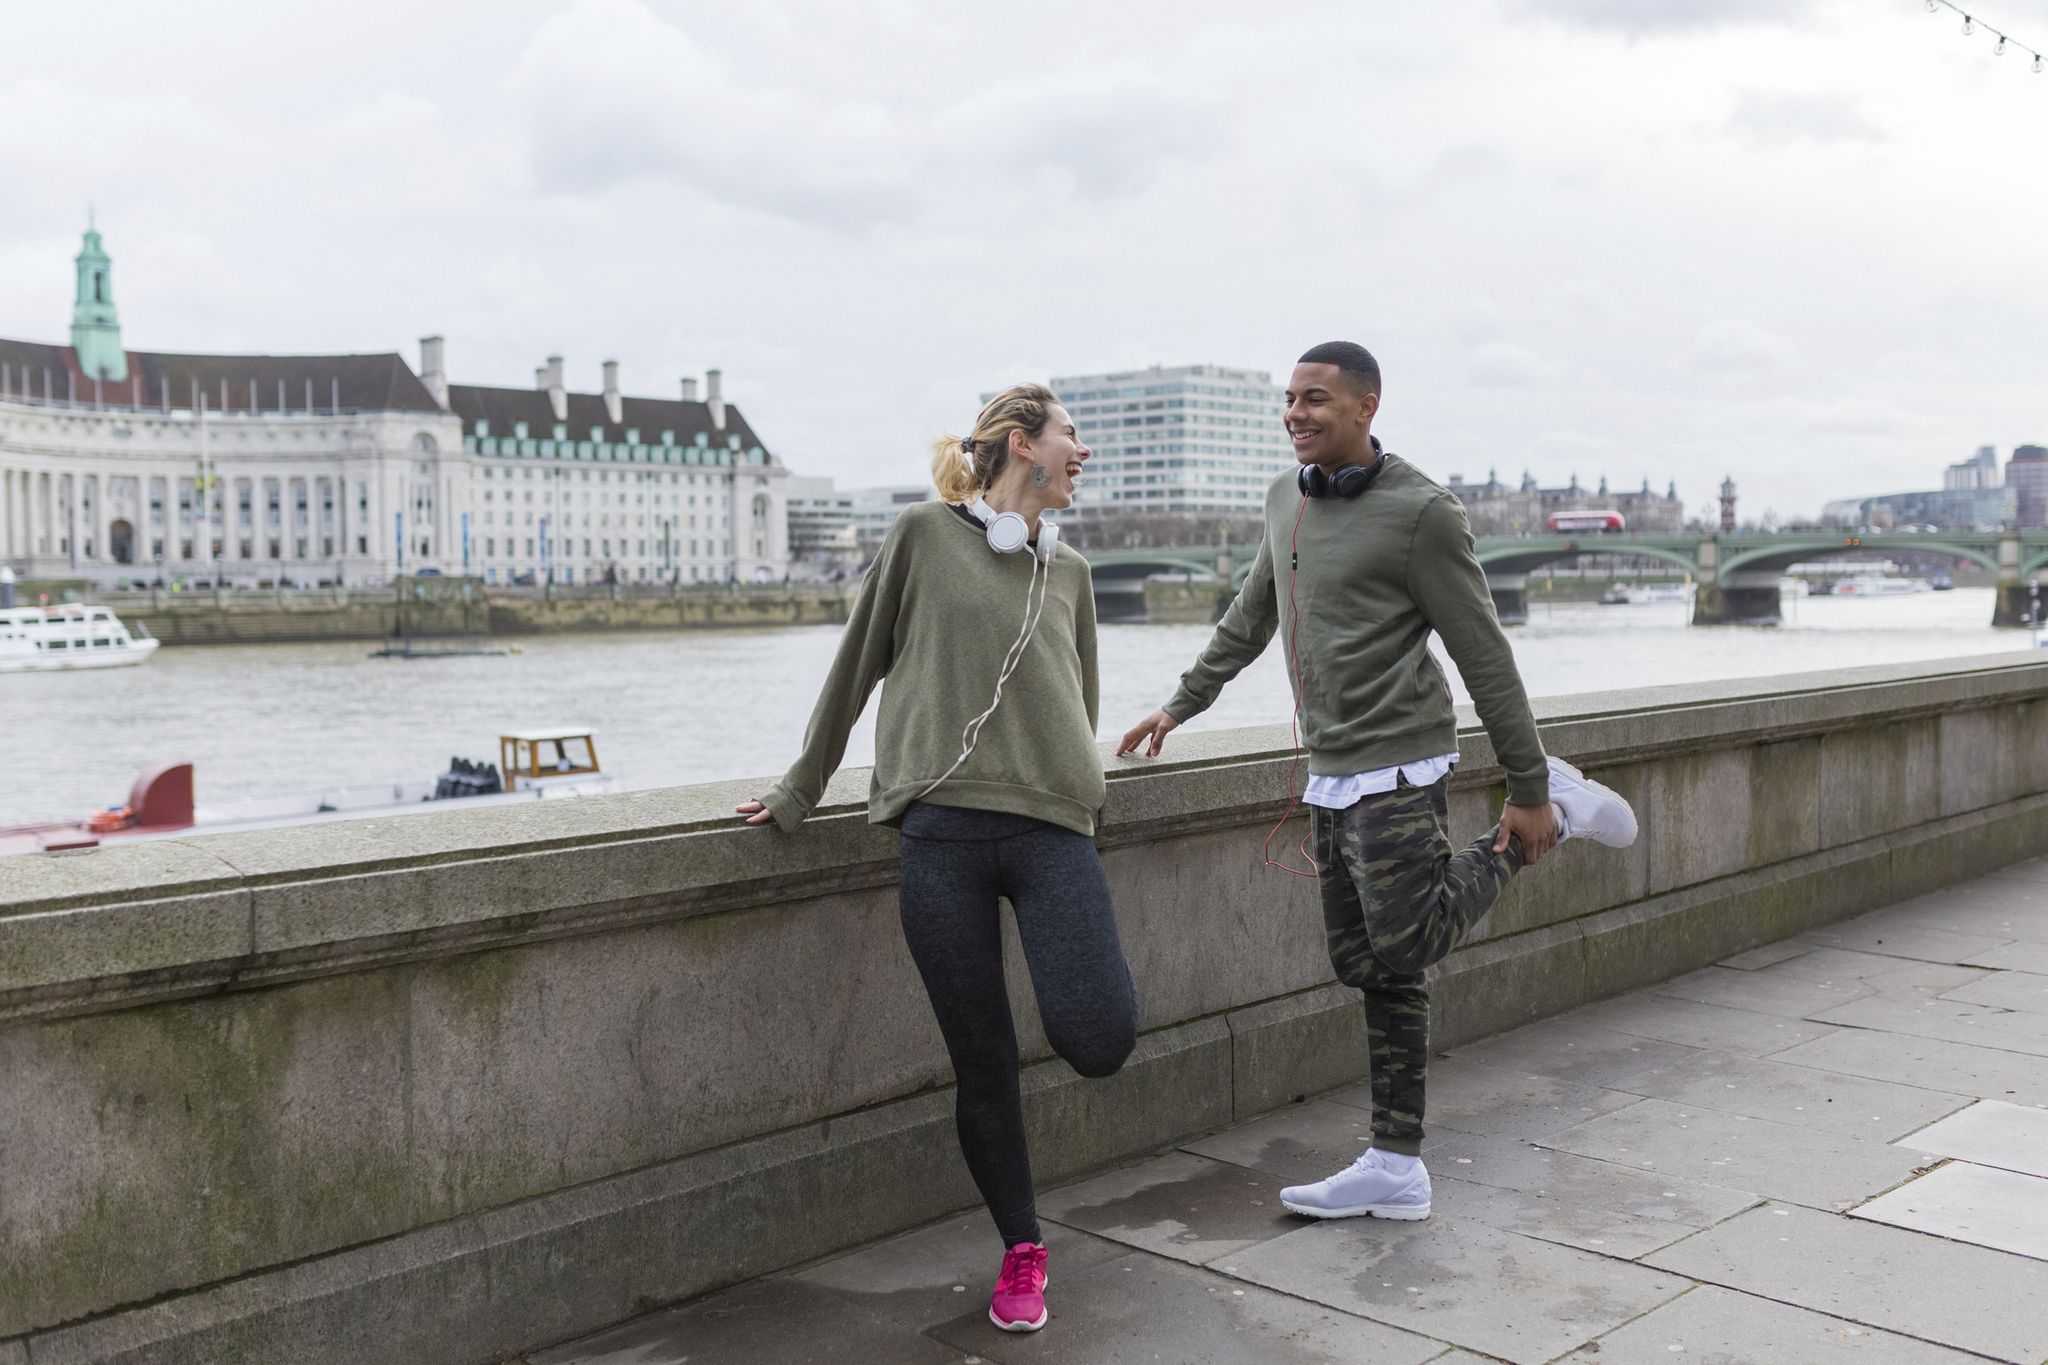 Running London: Our pick of the